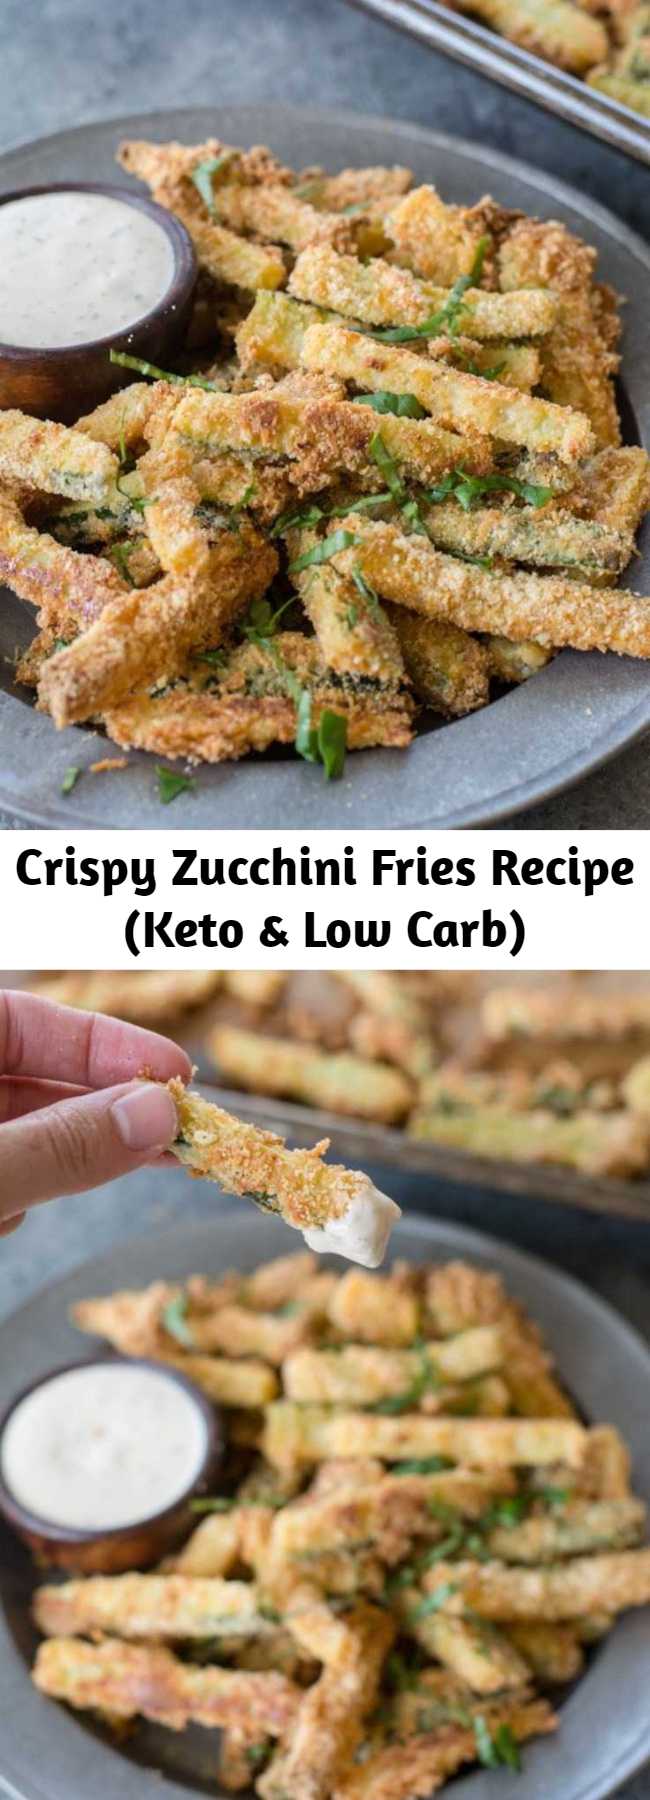 Crispy Zucchini Fries Recipe (Keto & Low Carb) - These Crispy Zucchini Fries are breaded with almond flour, parmesan and spices and baked until perfectly crispy! The perfect keto, low carb side dish! Only 3 net carbs per serving! #keto